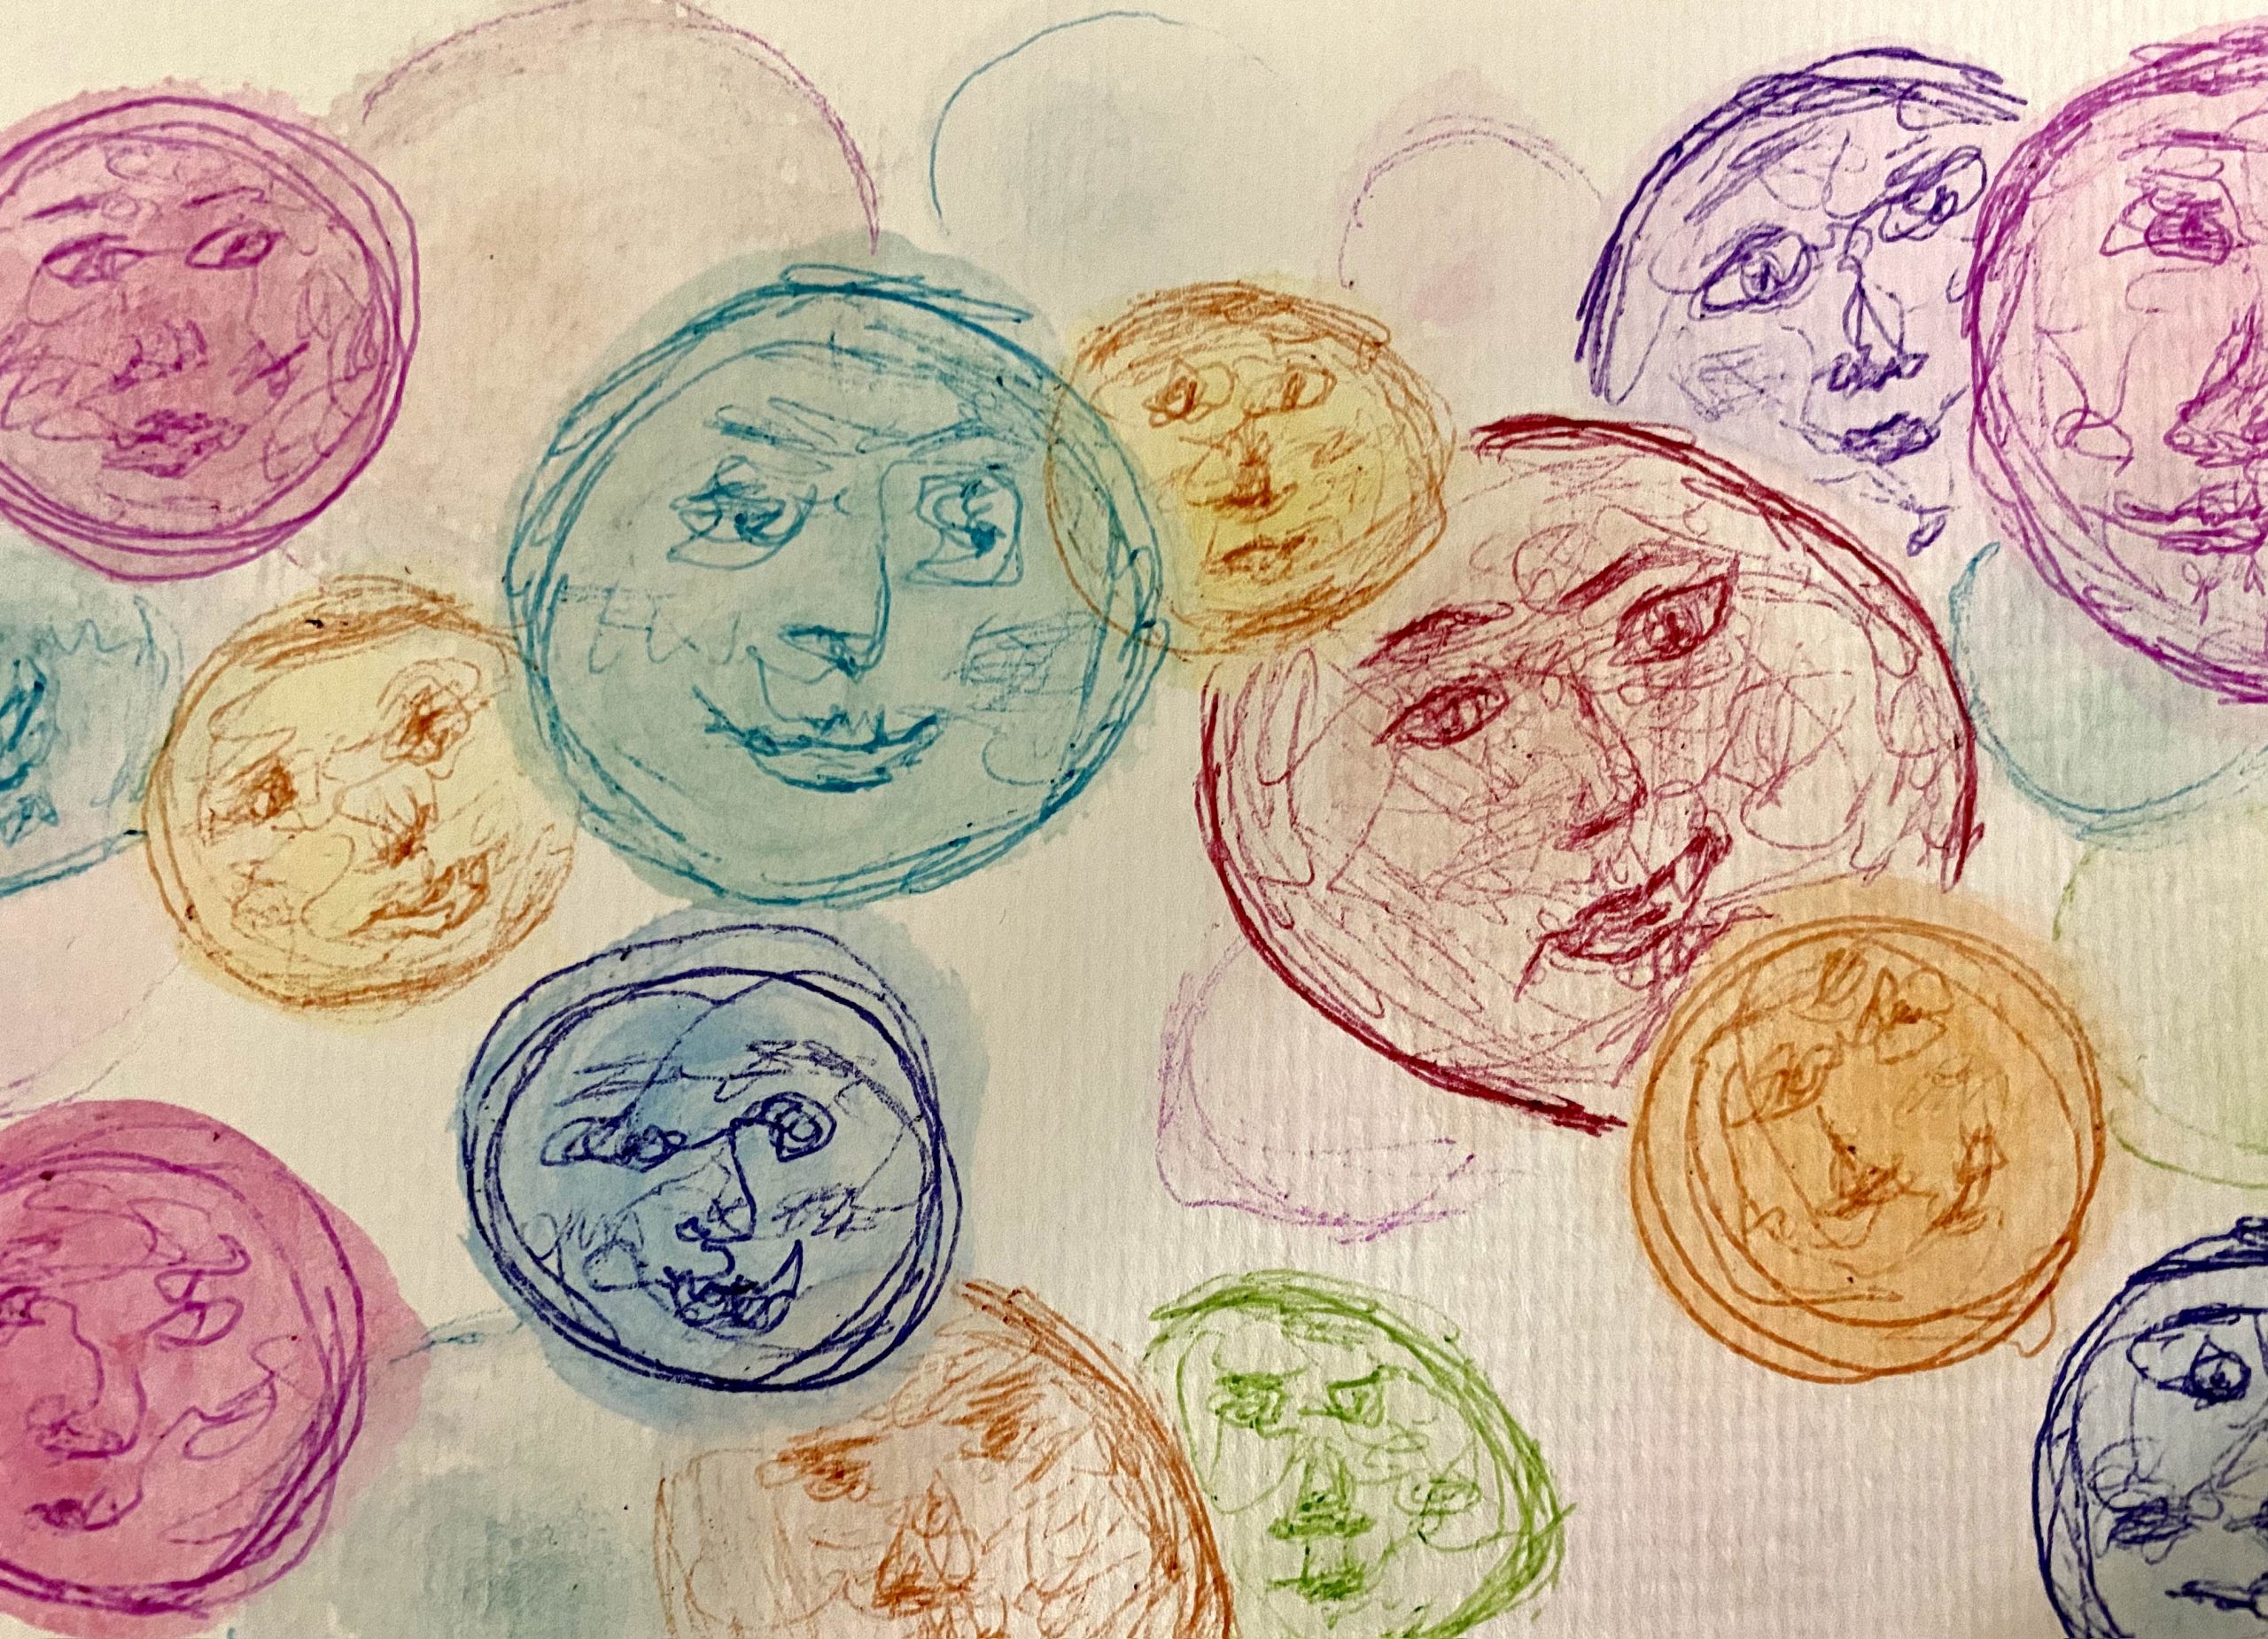 Drawing/Illustration. Sketches of Faces on colored circles. Multiple pen-sketched circles with plain faces, all of various colors. Not all circles have faces and they are all of different sizes.